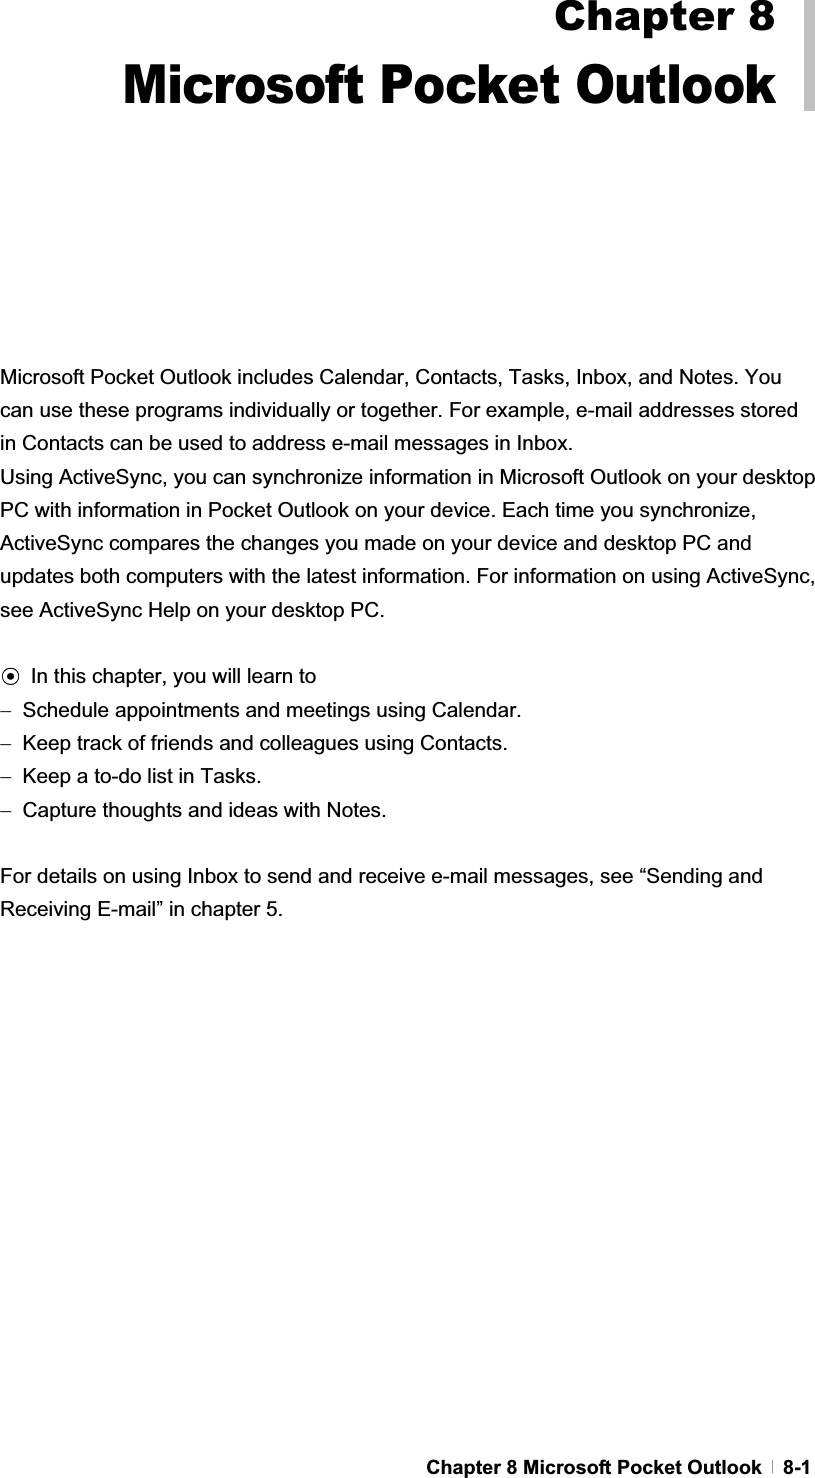 GChapter 8 Microsoft Pocket Outlook   8-1GGGGGGGGGGGMicrosoft Pocket Outlook includes Calendar, Contacts, Tasks, Inbox, and Notes. You can use these programs individually or together. For example, e-mail addresses stored in Contacts can be used to address e-mail messages in Inbox. Using ActiveSync, you can synchronize information in Microsoft Outlook on your desktop PC with information in Pocket Outlook on your device. Each time you synchronize, ActiveSync compares the changes you made on your device and desktop PC and updates both computers with the latest information. For information on using ActiveSync, see ActiveSync Help on your desktop PC. ඝIn this chapter, you will learn to Schedule appointments and meetings using Calendar.  Keep track of friends and colleagues using Contacts.  Keep a to-do list in Tasks.  Capture thoughts and ideas with Notes. For details on using Inbox to send and receive e-mail messages, see “Sending and Receiving E-mail” in chapter 5. Chapter 8Microsoft Pocket Outlook